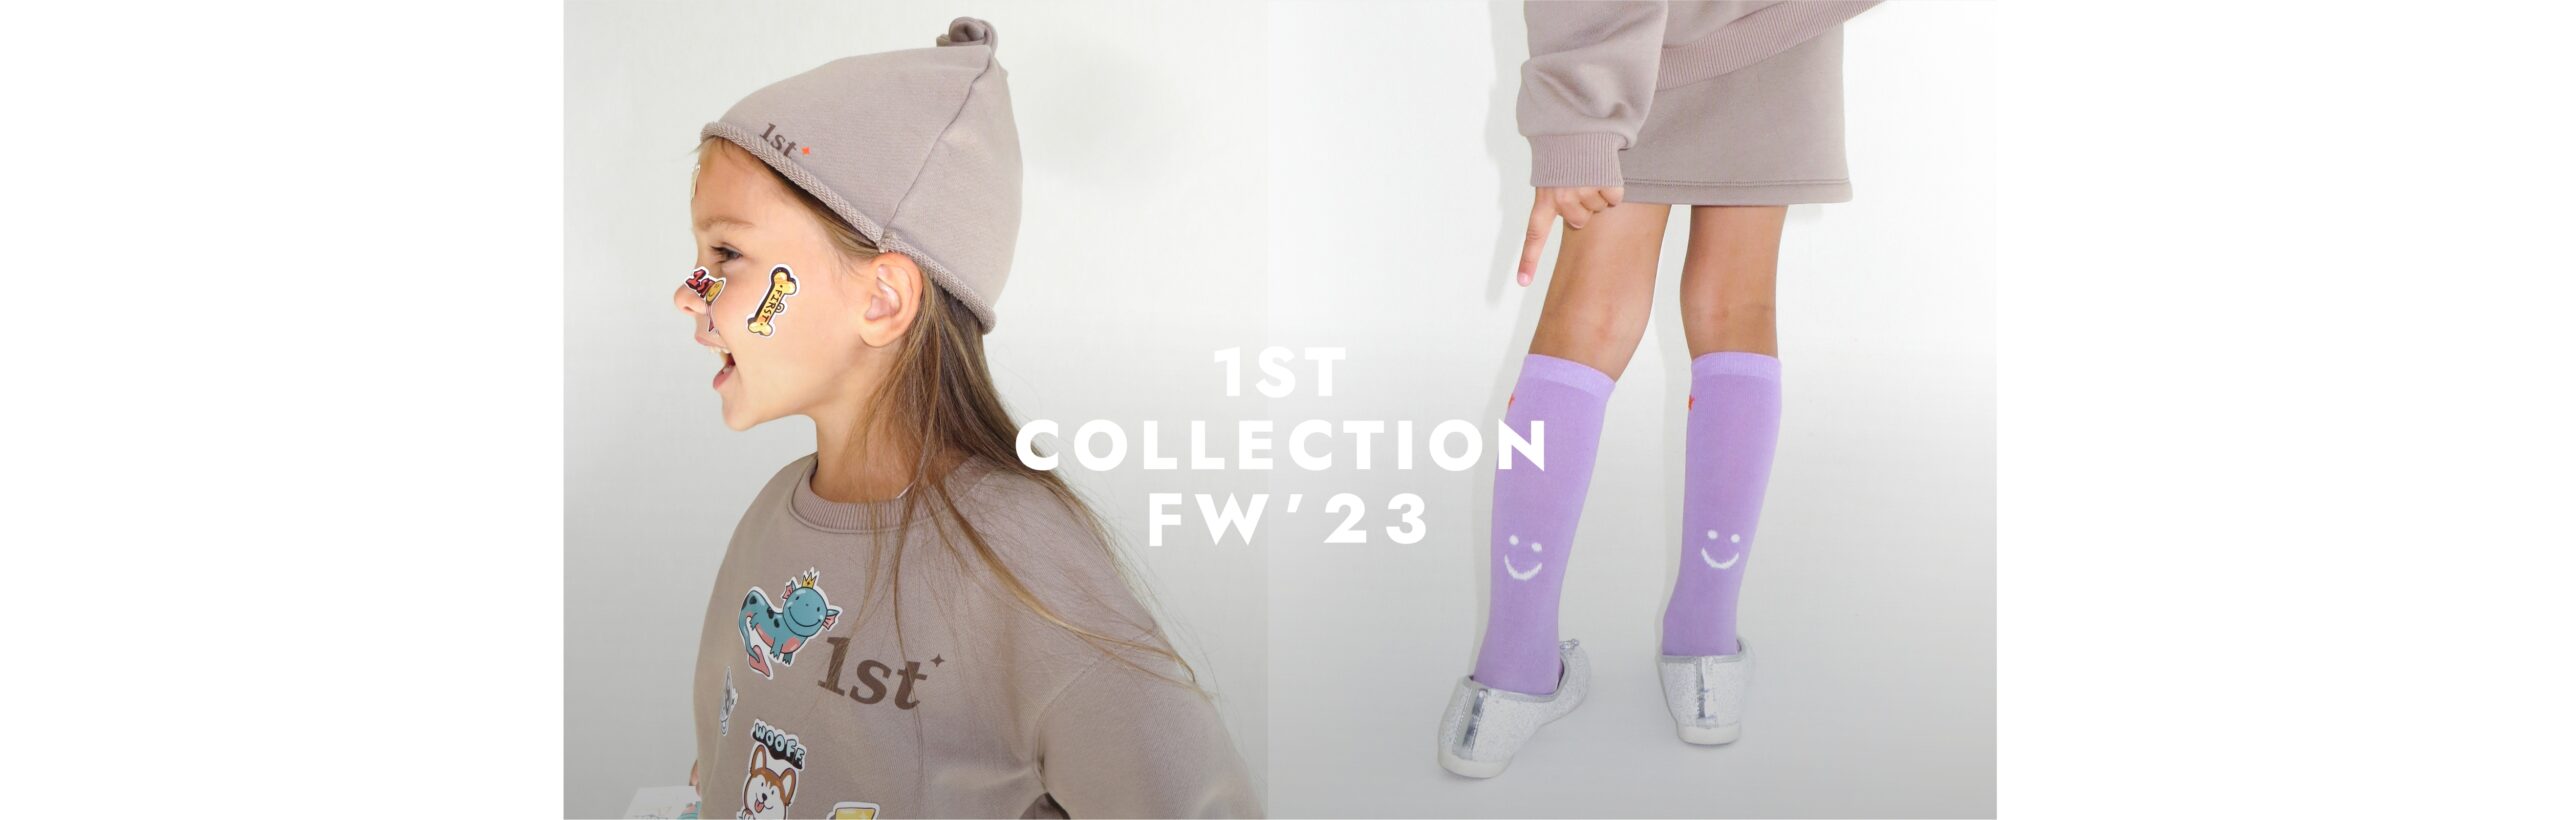 1ST COLLECTION FW'23